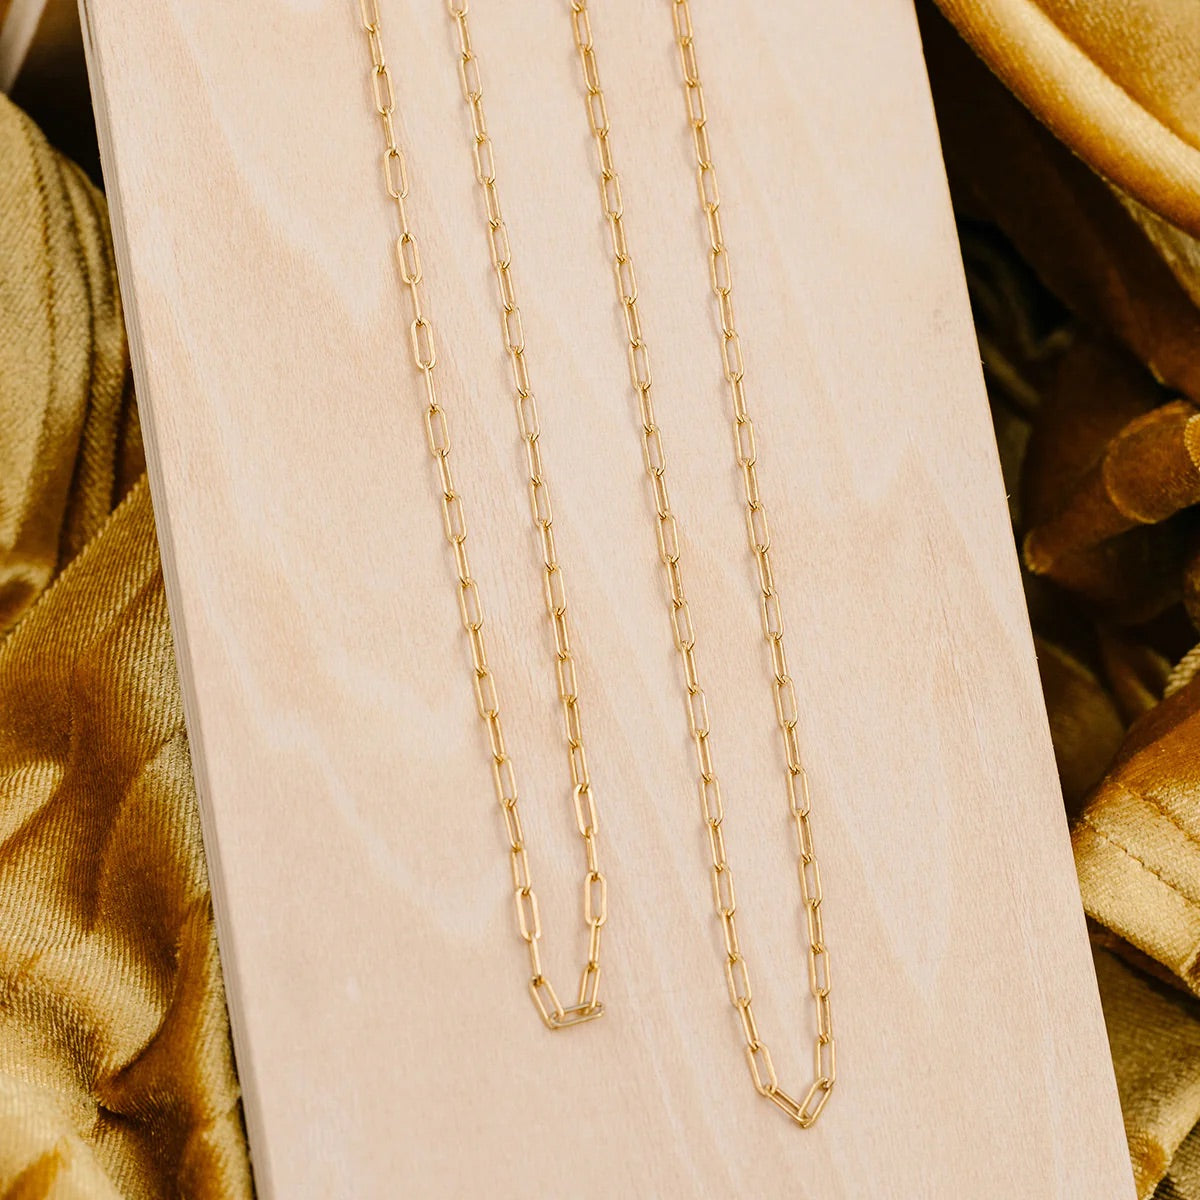 Jude Chain Necklace - Gold Filled